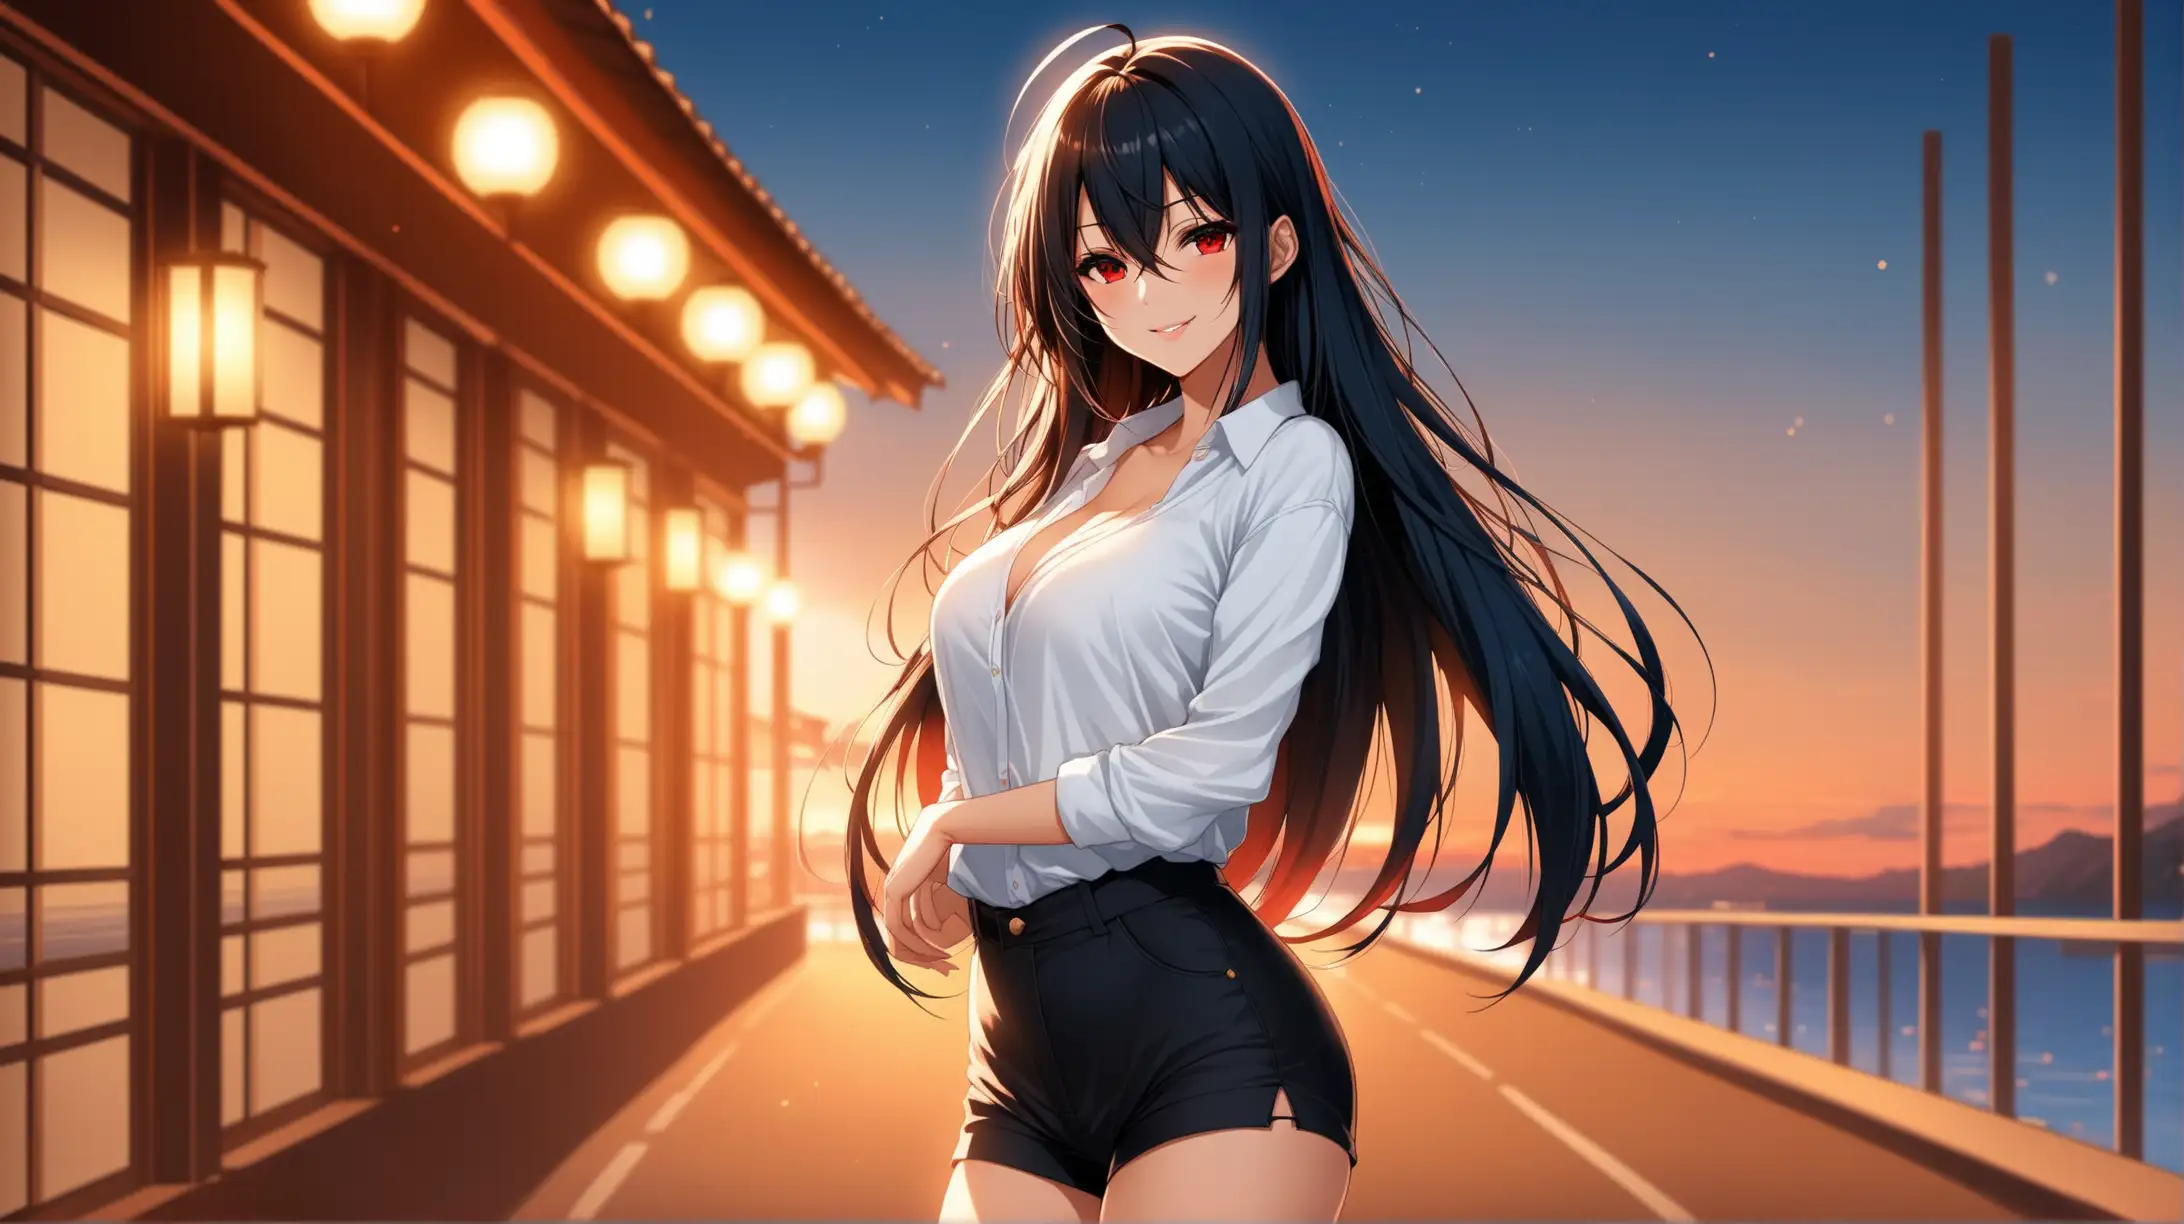 Draw the character Taihou from Azur Lane, red eyes, long hair, high quality, ambient lighting, long shot, outdoors, seductive pose, casual outfit, smiling